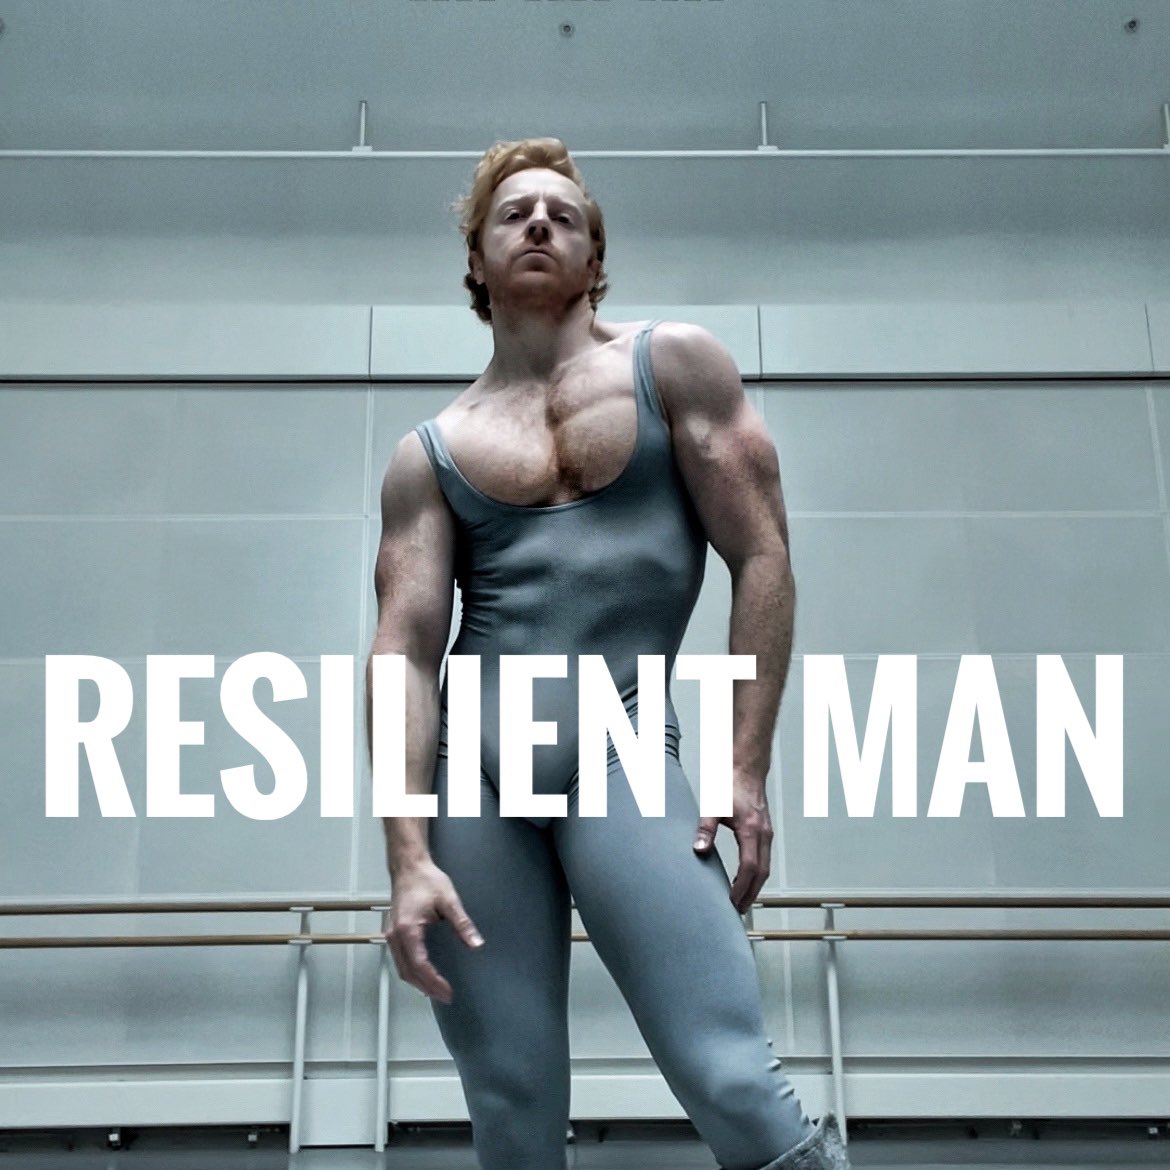 ❗️EXCITING NEWS❗️ RESILIENT MAN to be shown in the UK on the BBC 📺 The exact date in Autumn will be announced when the full BBC Schedule is released! instagram.com/p/C69X2a0N0Vg/…